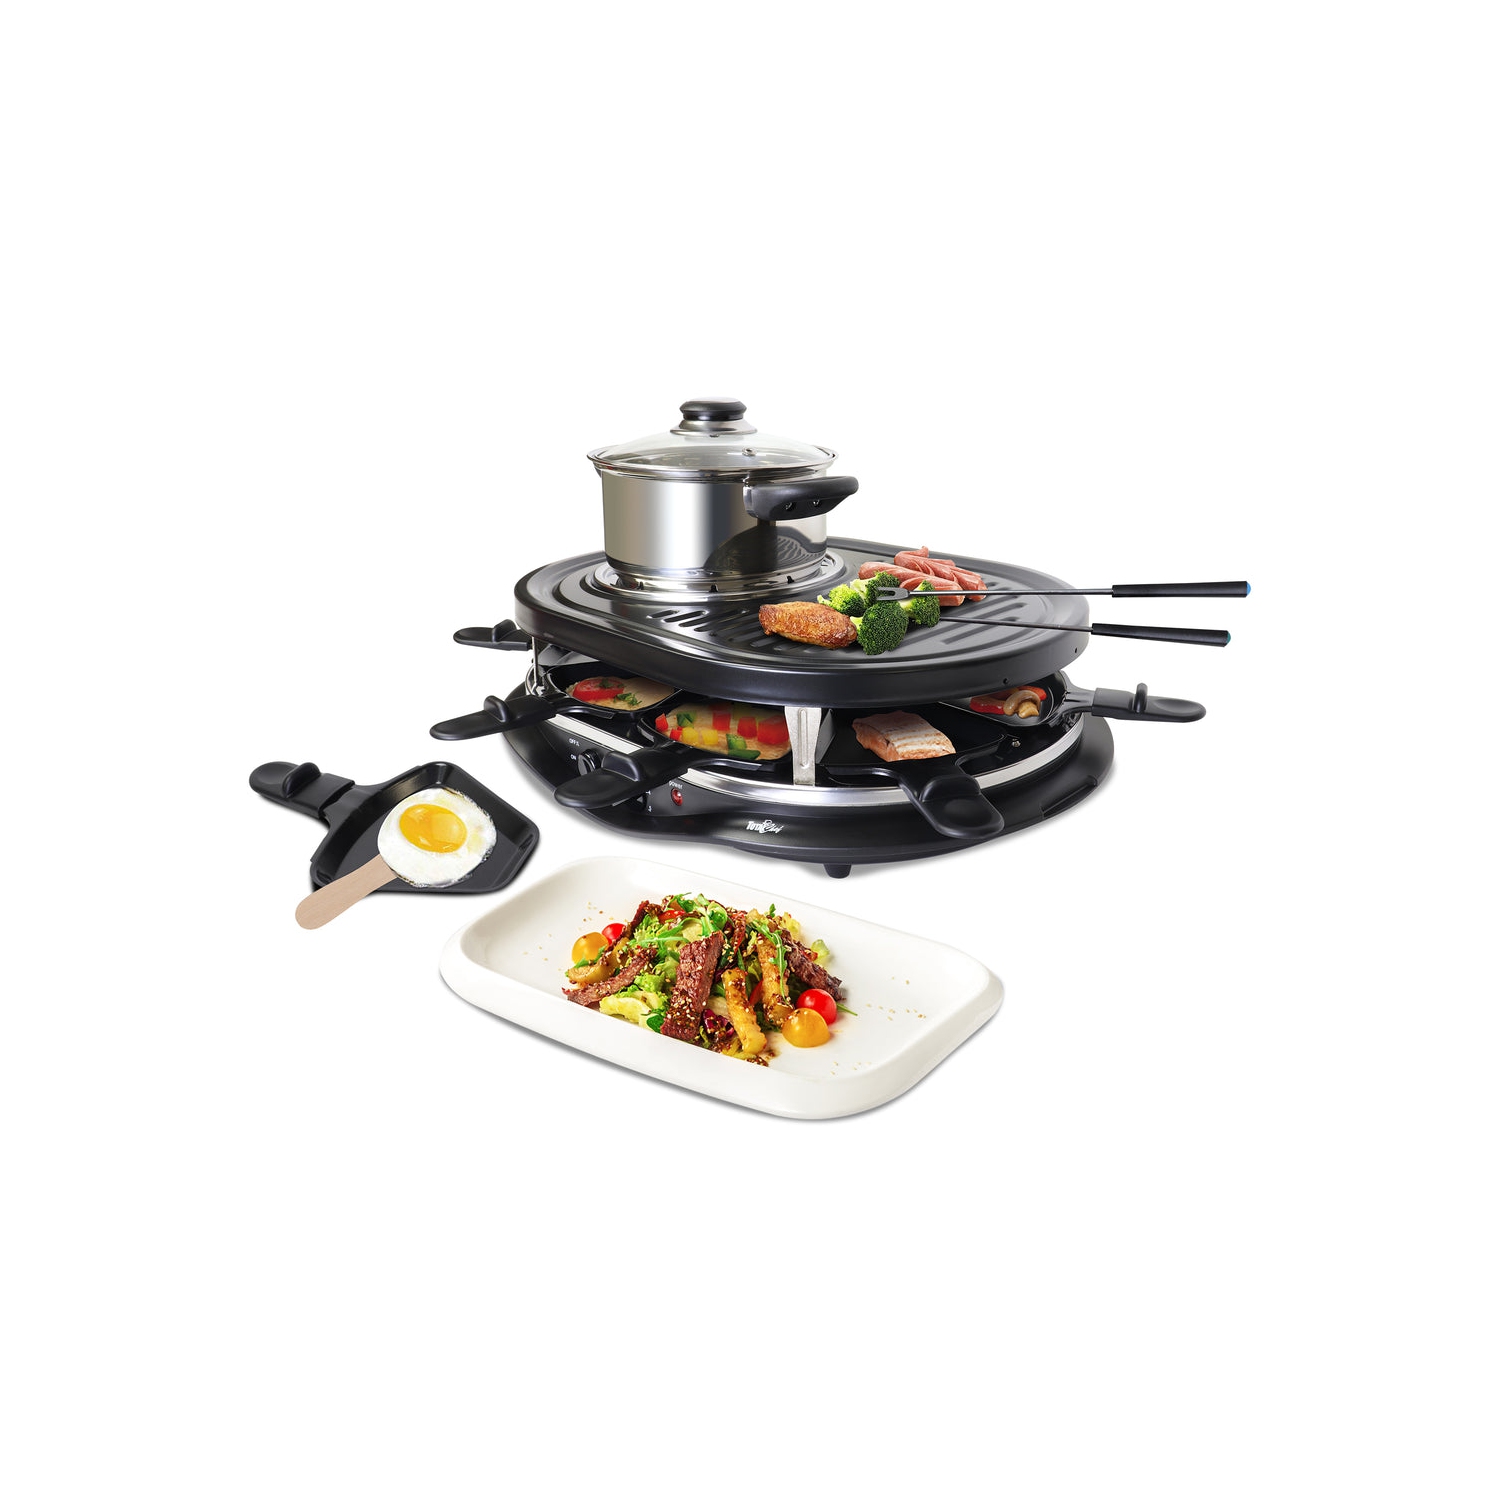 Total Chef 8 Person Raclette and Cheese Fondue Set with Granite Stone, Non-Stick Electric Indoor Grill, Accessories Included, Ideal for Holidays and Family Dinners, Black